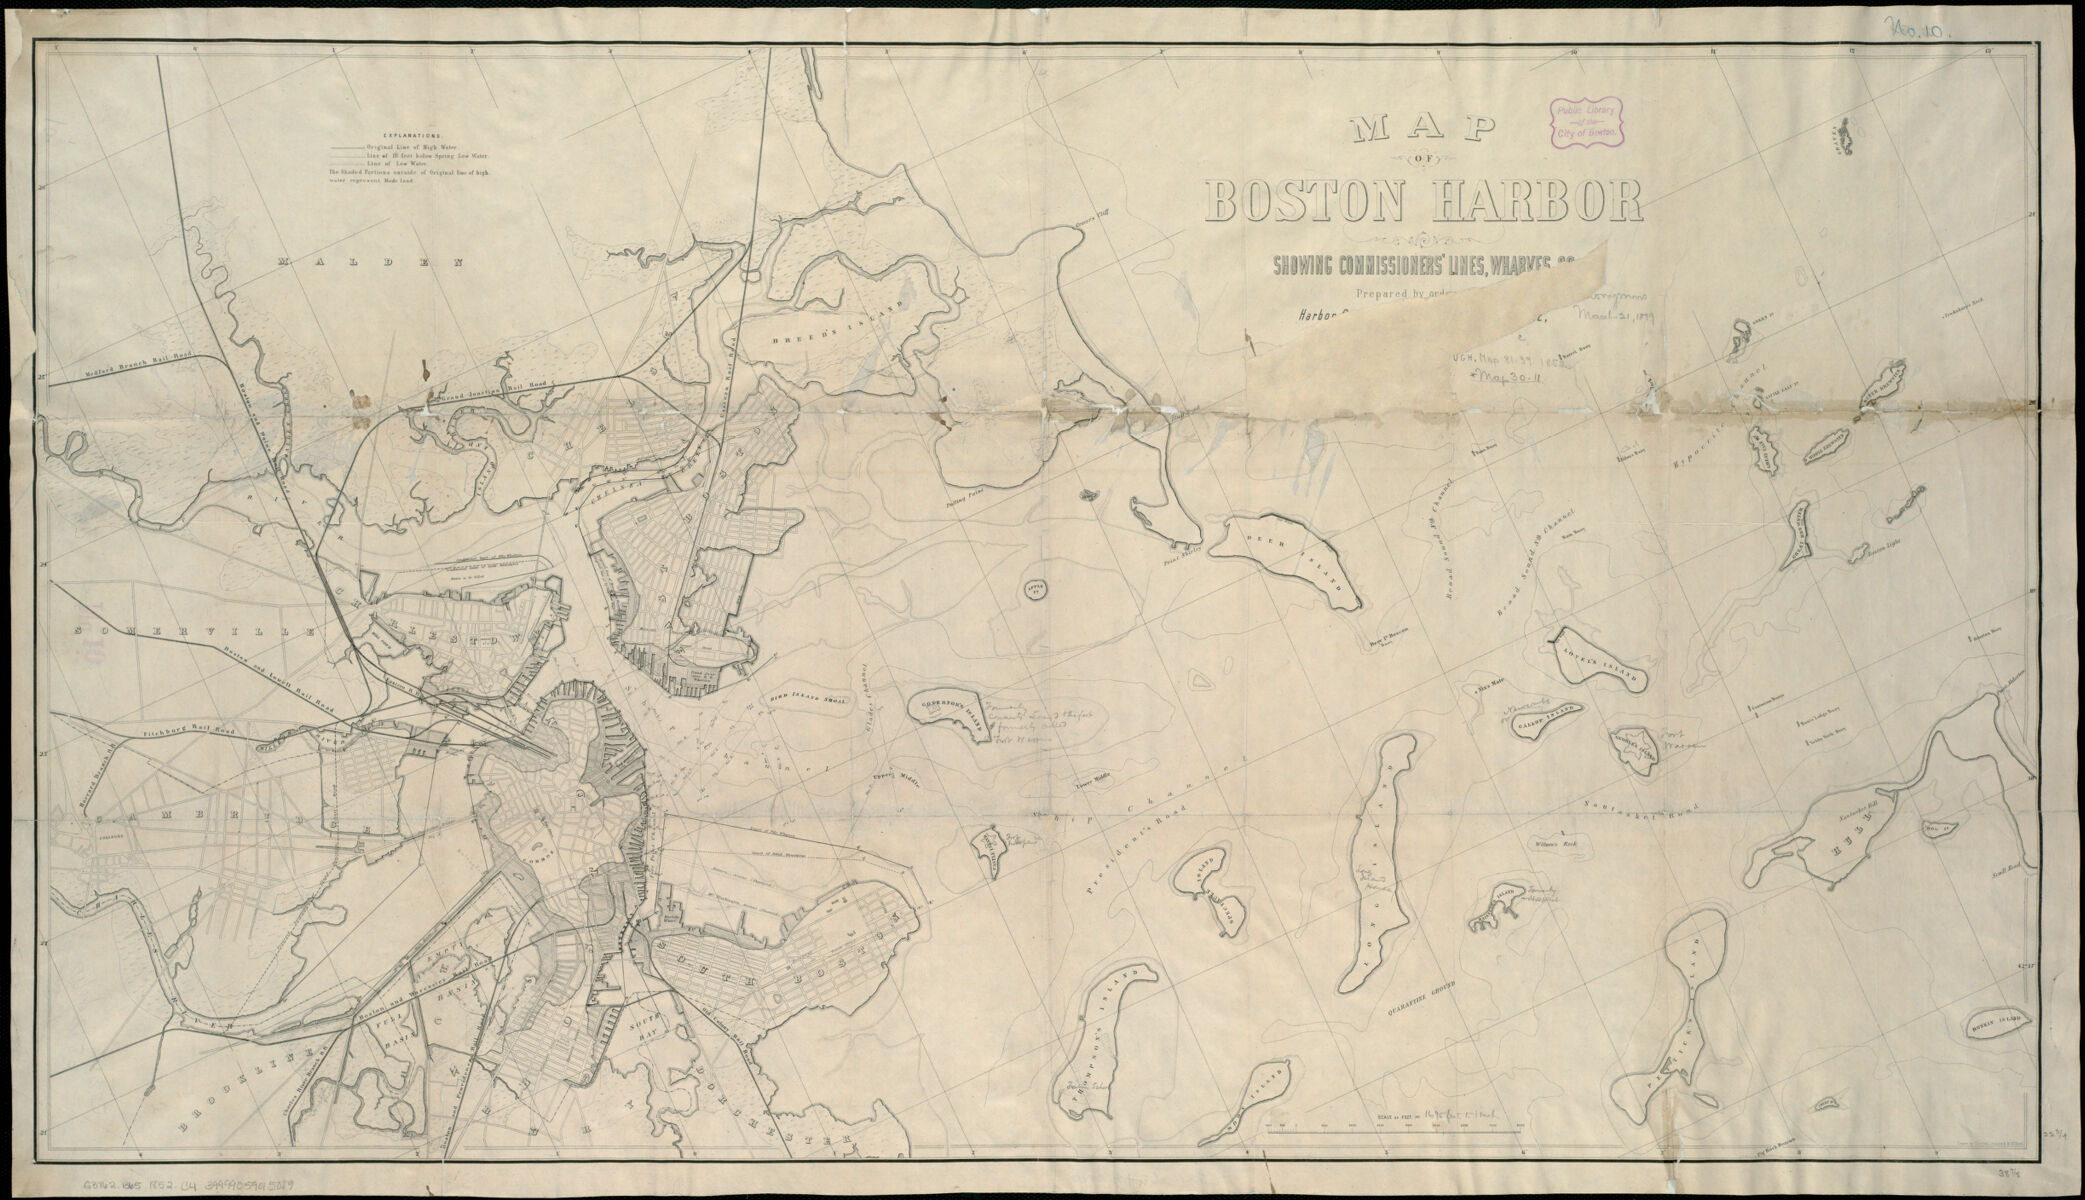 The Harbor Commissioners' map of Boston Harbor from 1852.